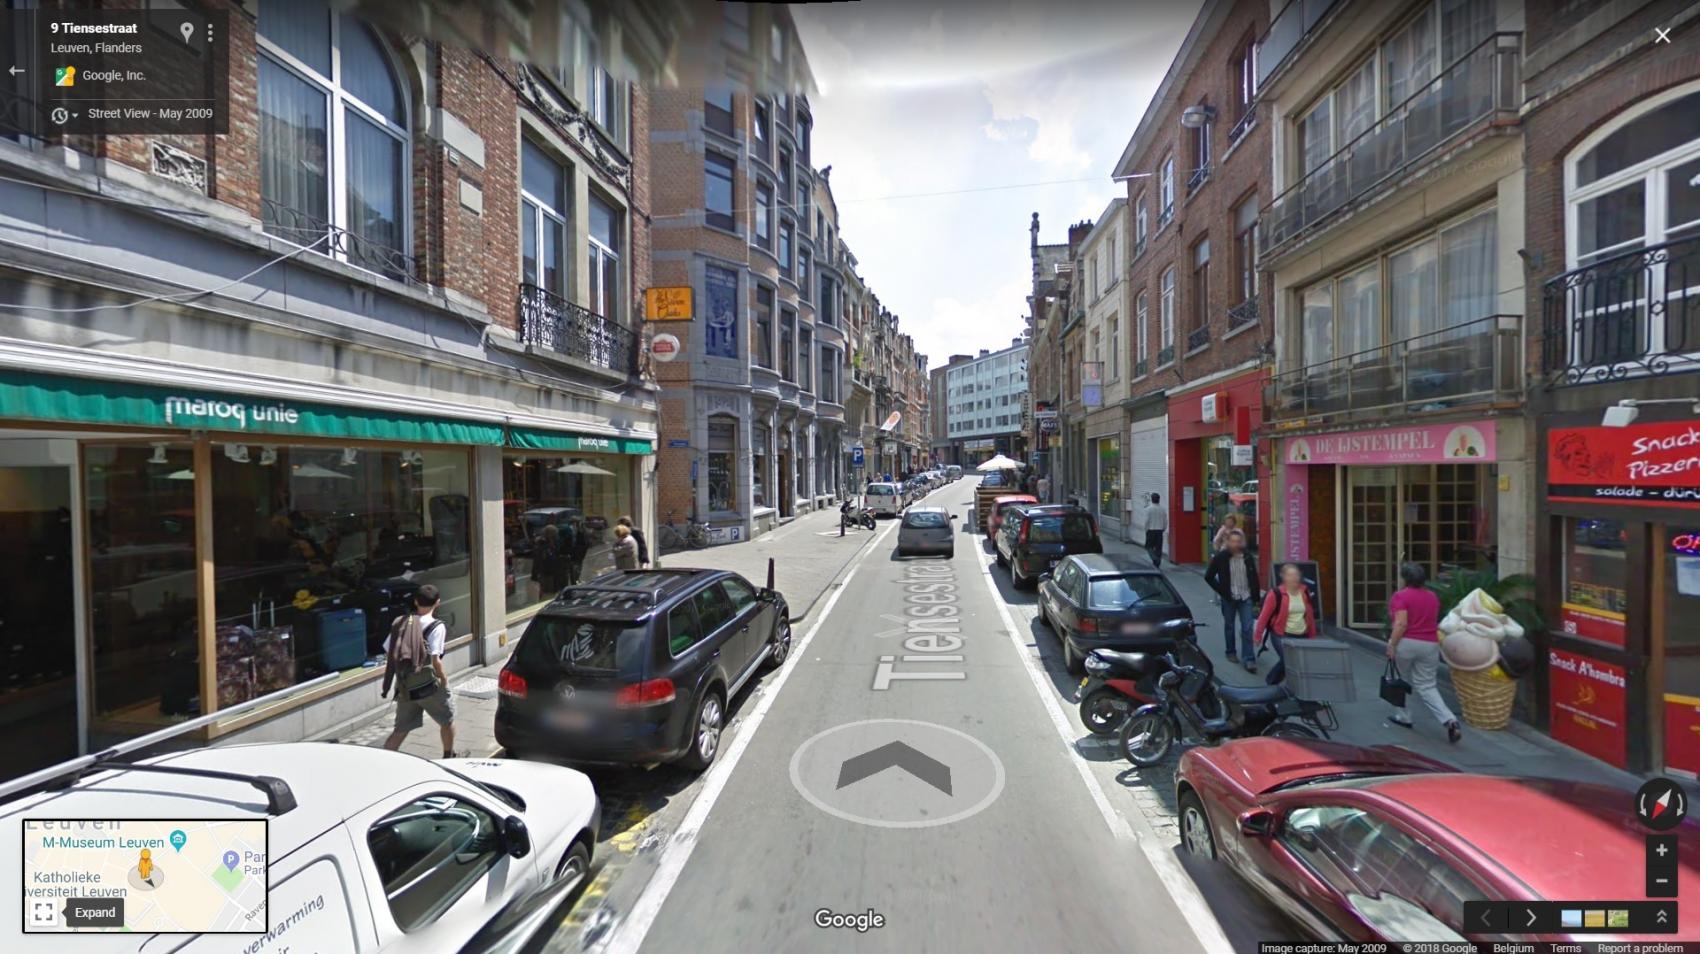 Tiensestraat, one of the recently pedestrianised streets, in 2009. Photo credit: Google Street View.